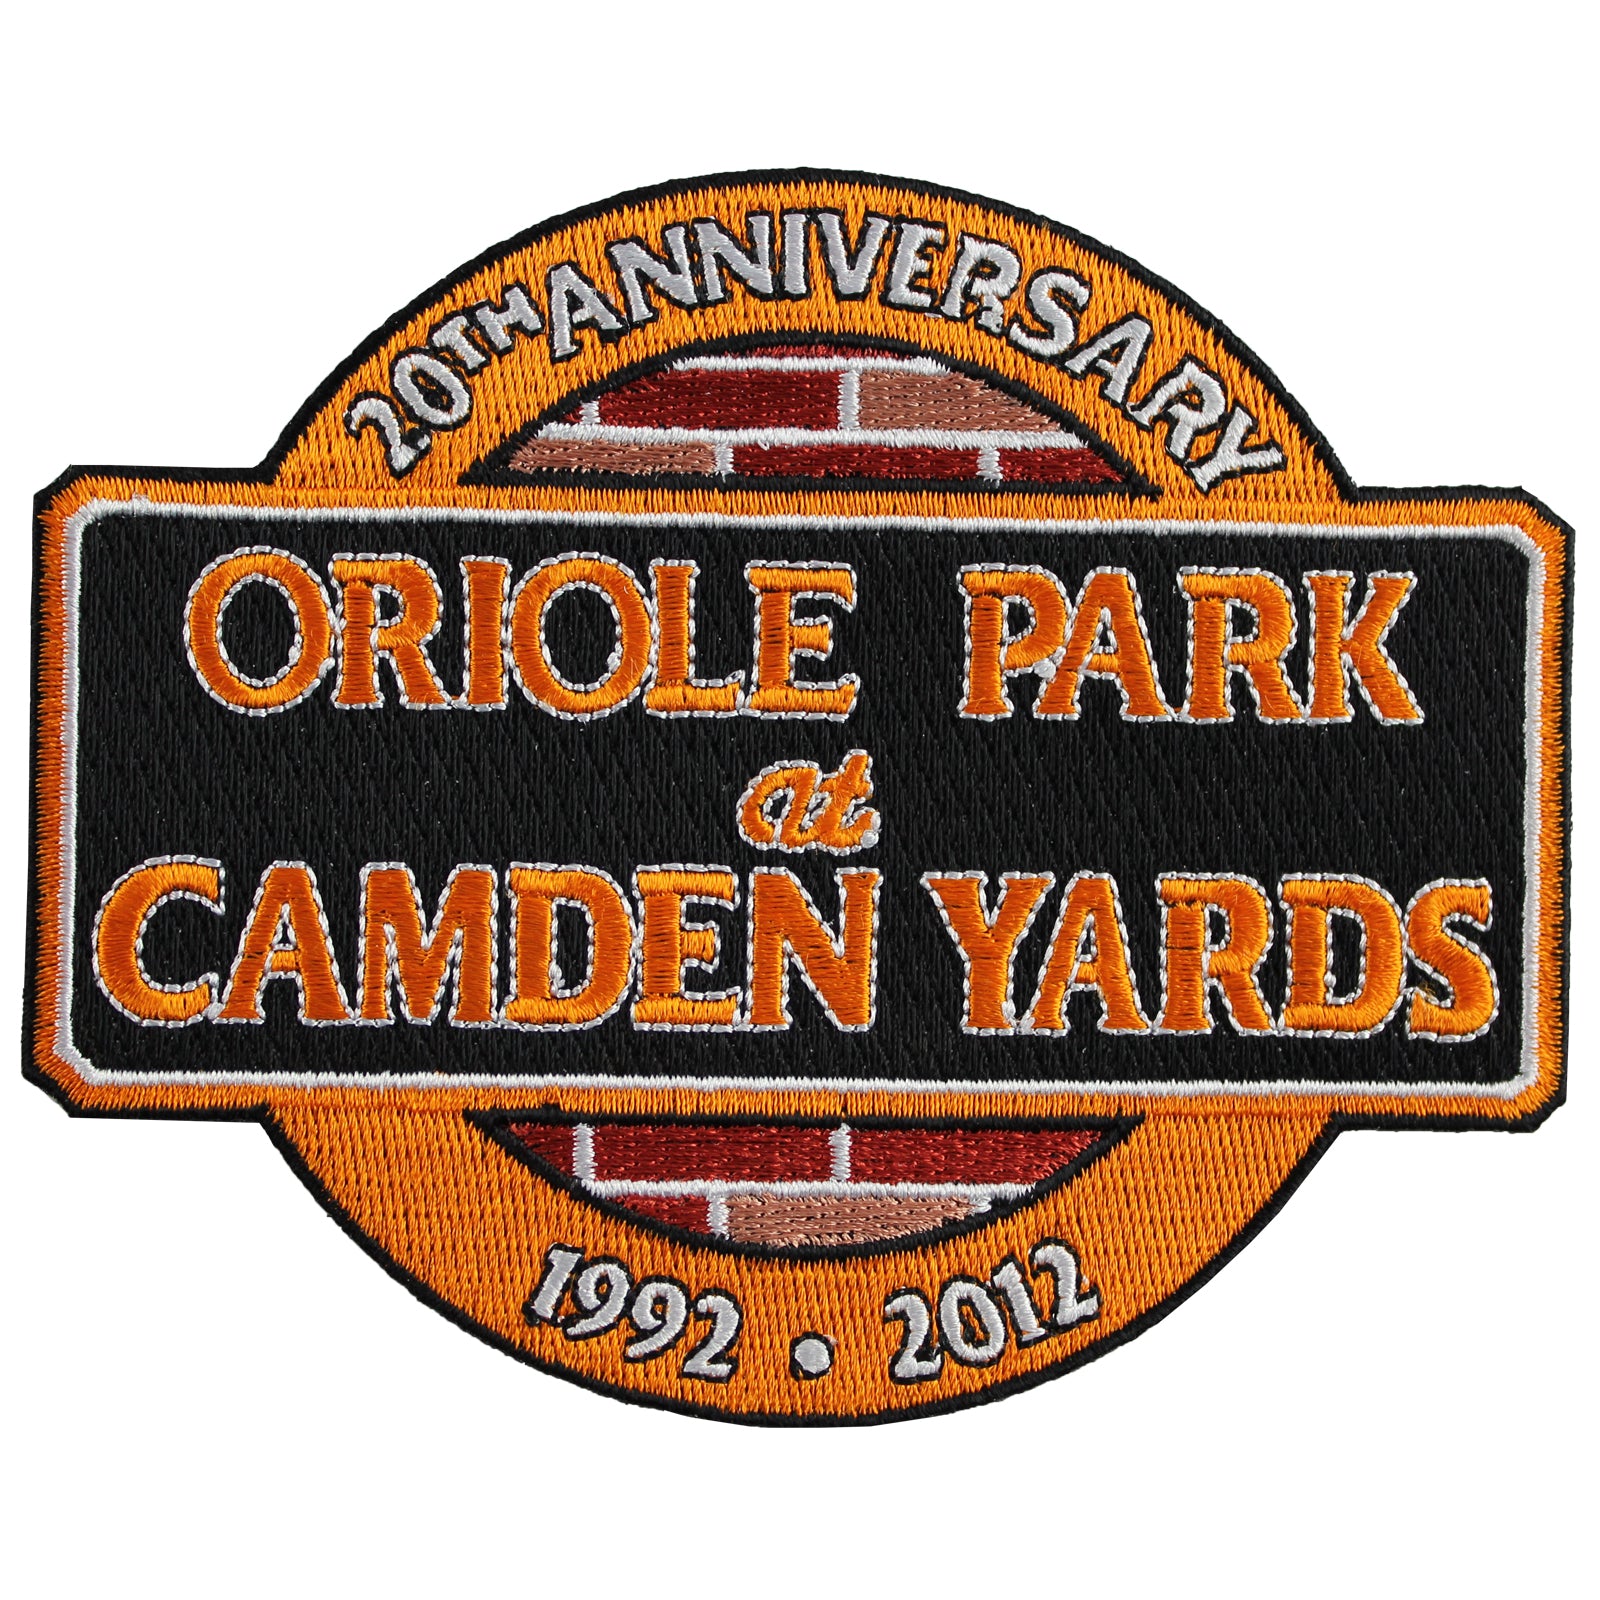 2012 Baltimore Orioles "Oriole Park at Camden Yards" 20th Anniversary Patch 